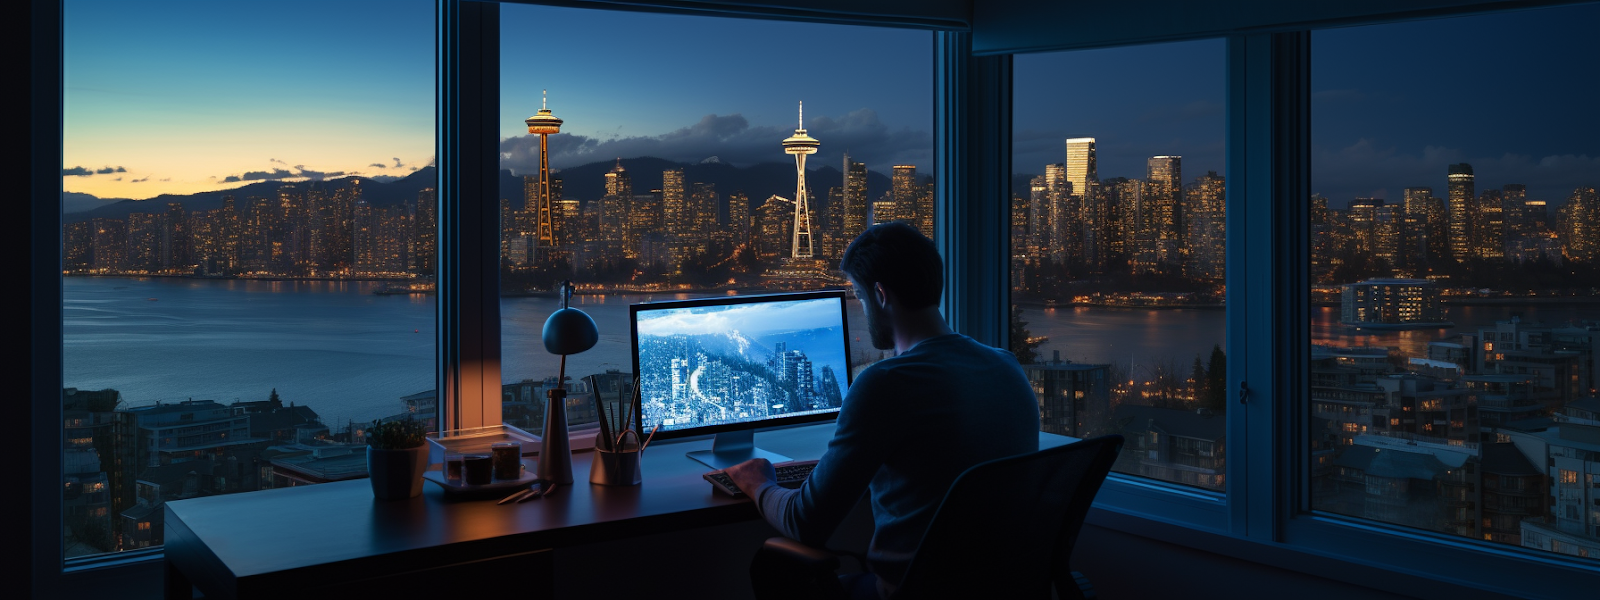 a person sits at a desk with a laptop, surrounded by vancouver cityscape on a computer screen, while a team of seo specialists work together in the background.